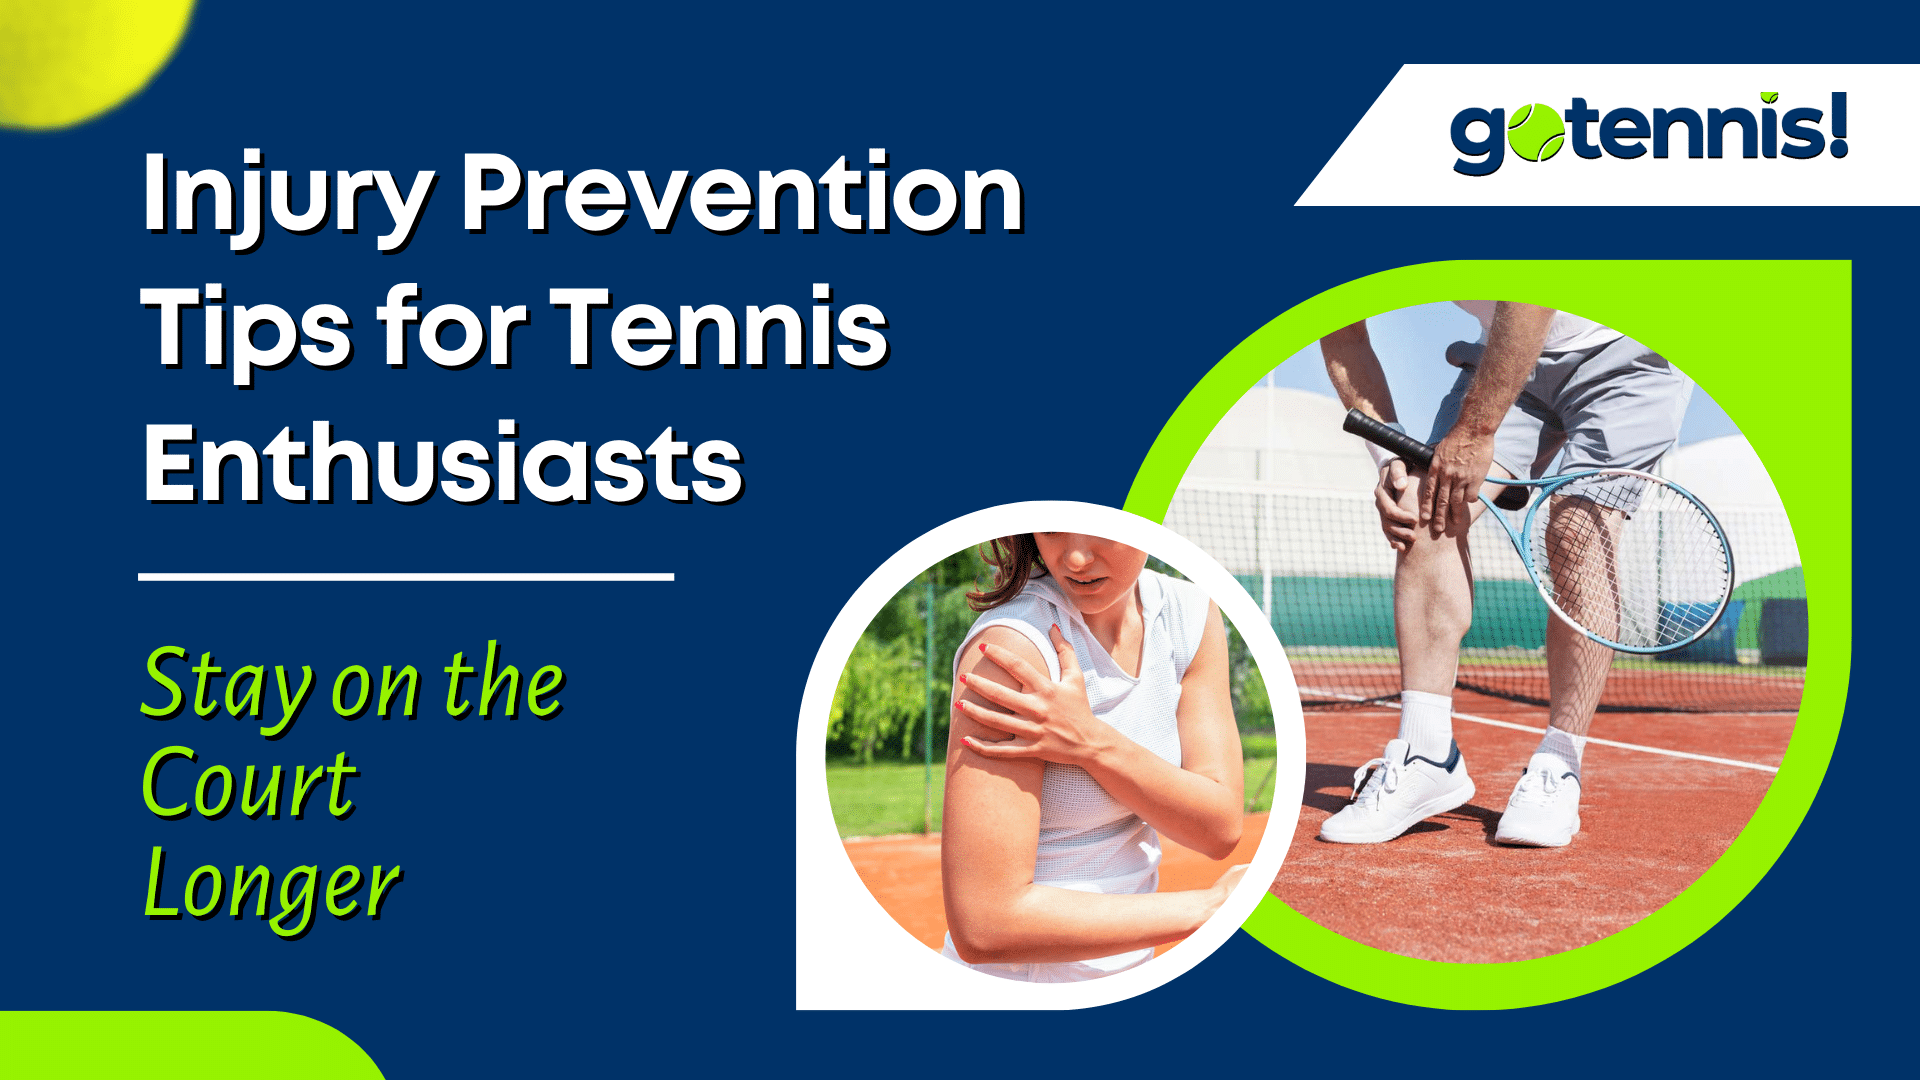 Tennis injury prevention stretches for Tennis Enthusiasts: “Stay on the Court Longer”